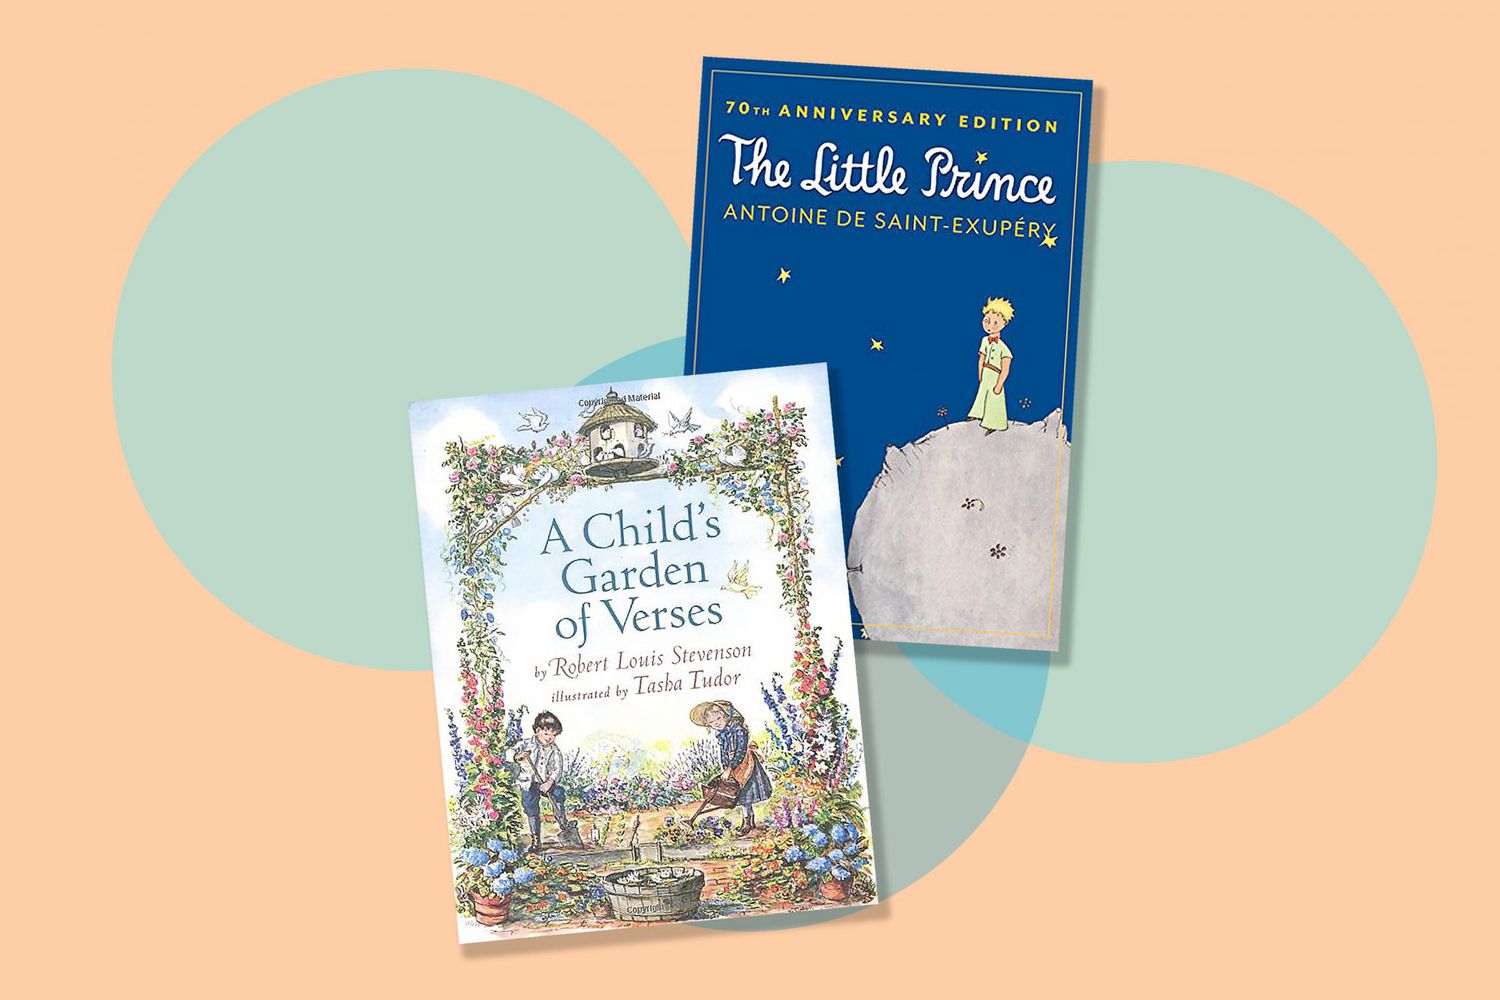 The Child's Garden of Verses Book Cover and The Little Prince Book Cover